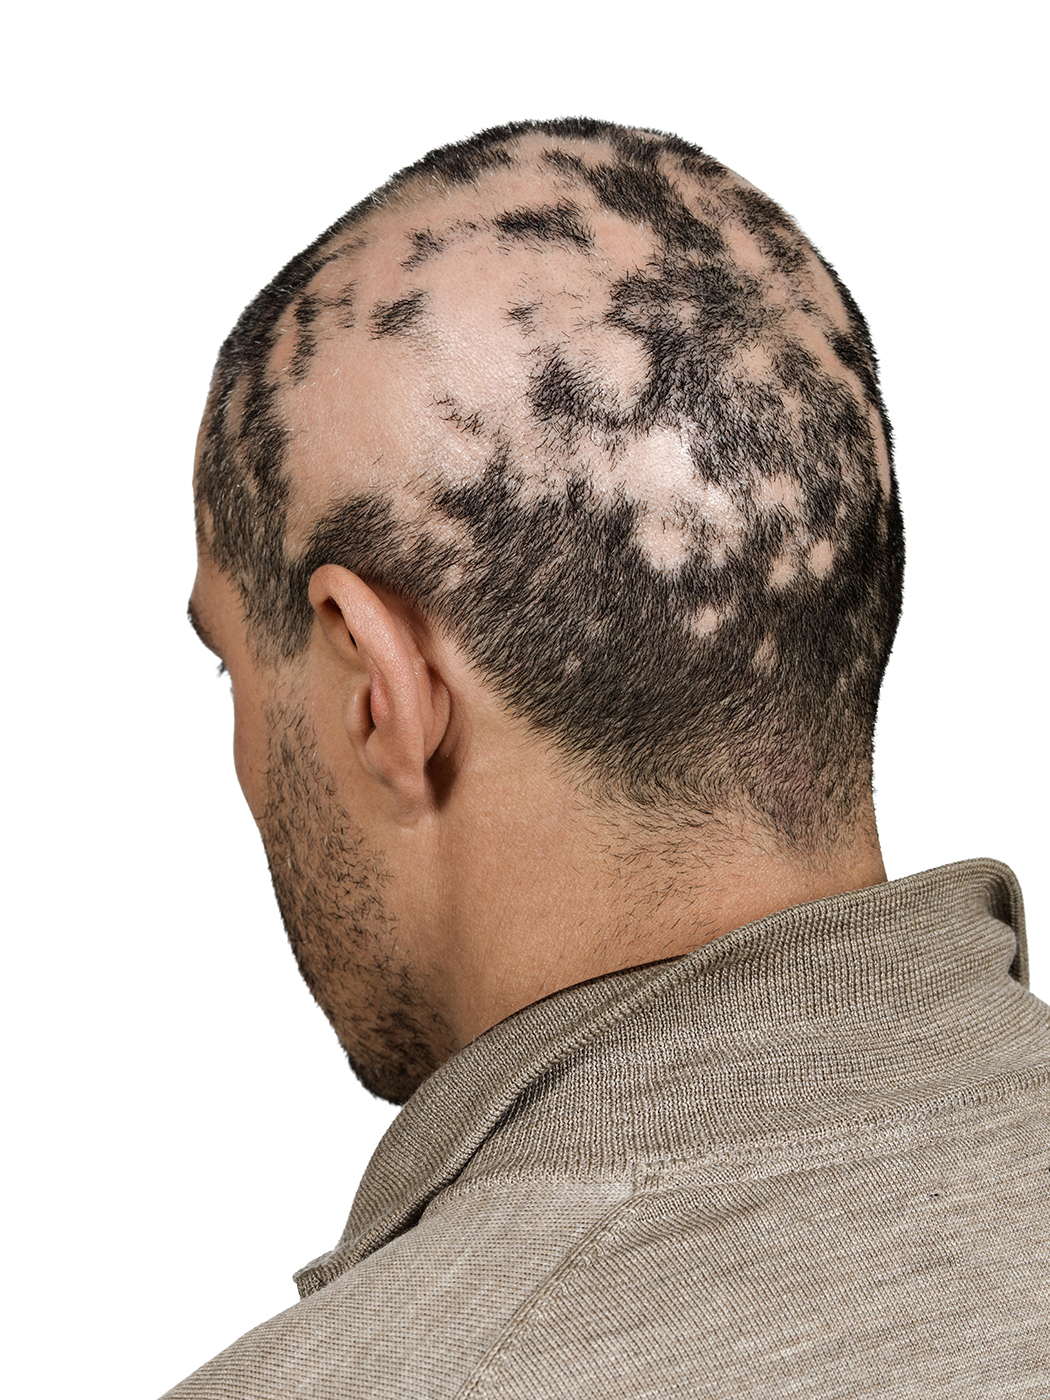 Hair Toppiks Hair Regrowth for Men and Hair Loss Options